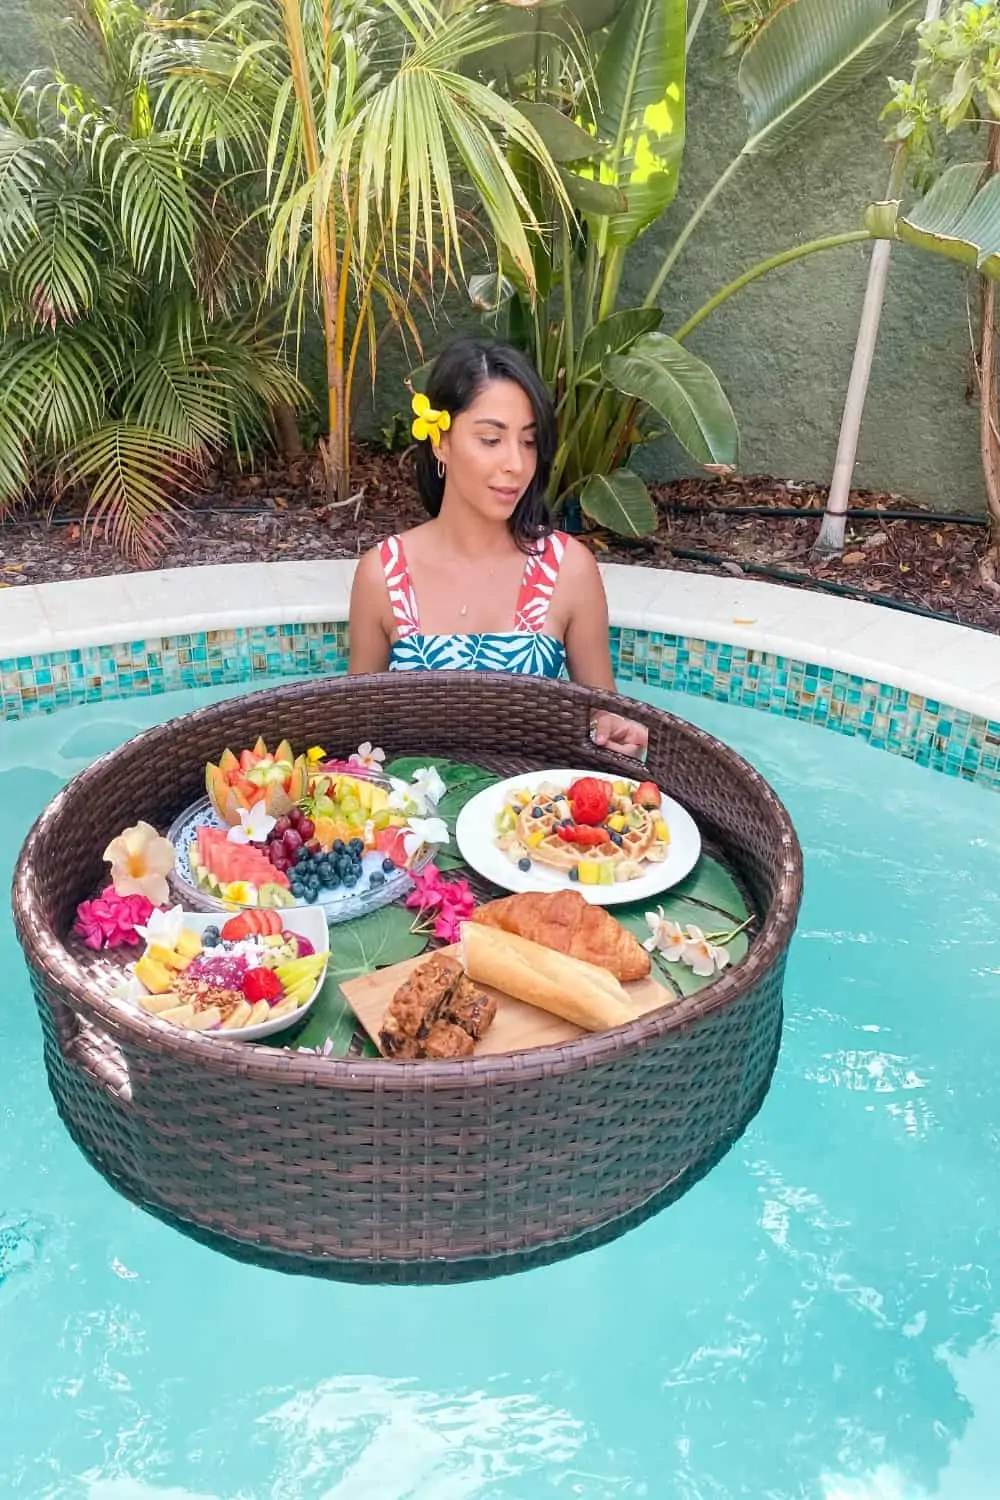 Brunch food on plates floating on a large tray in an outdoor pool with a woman next to it